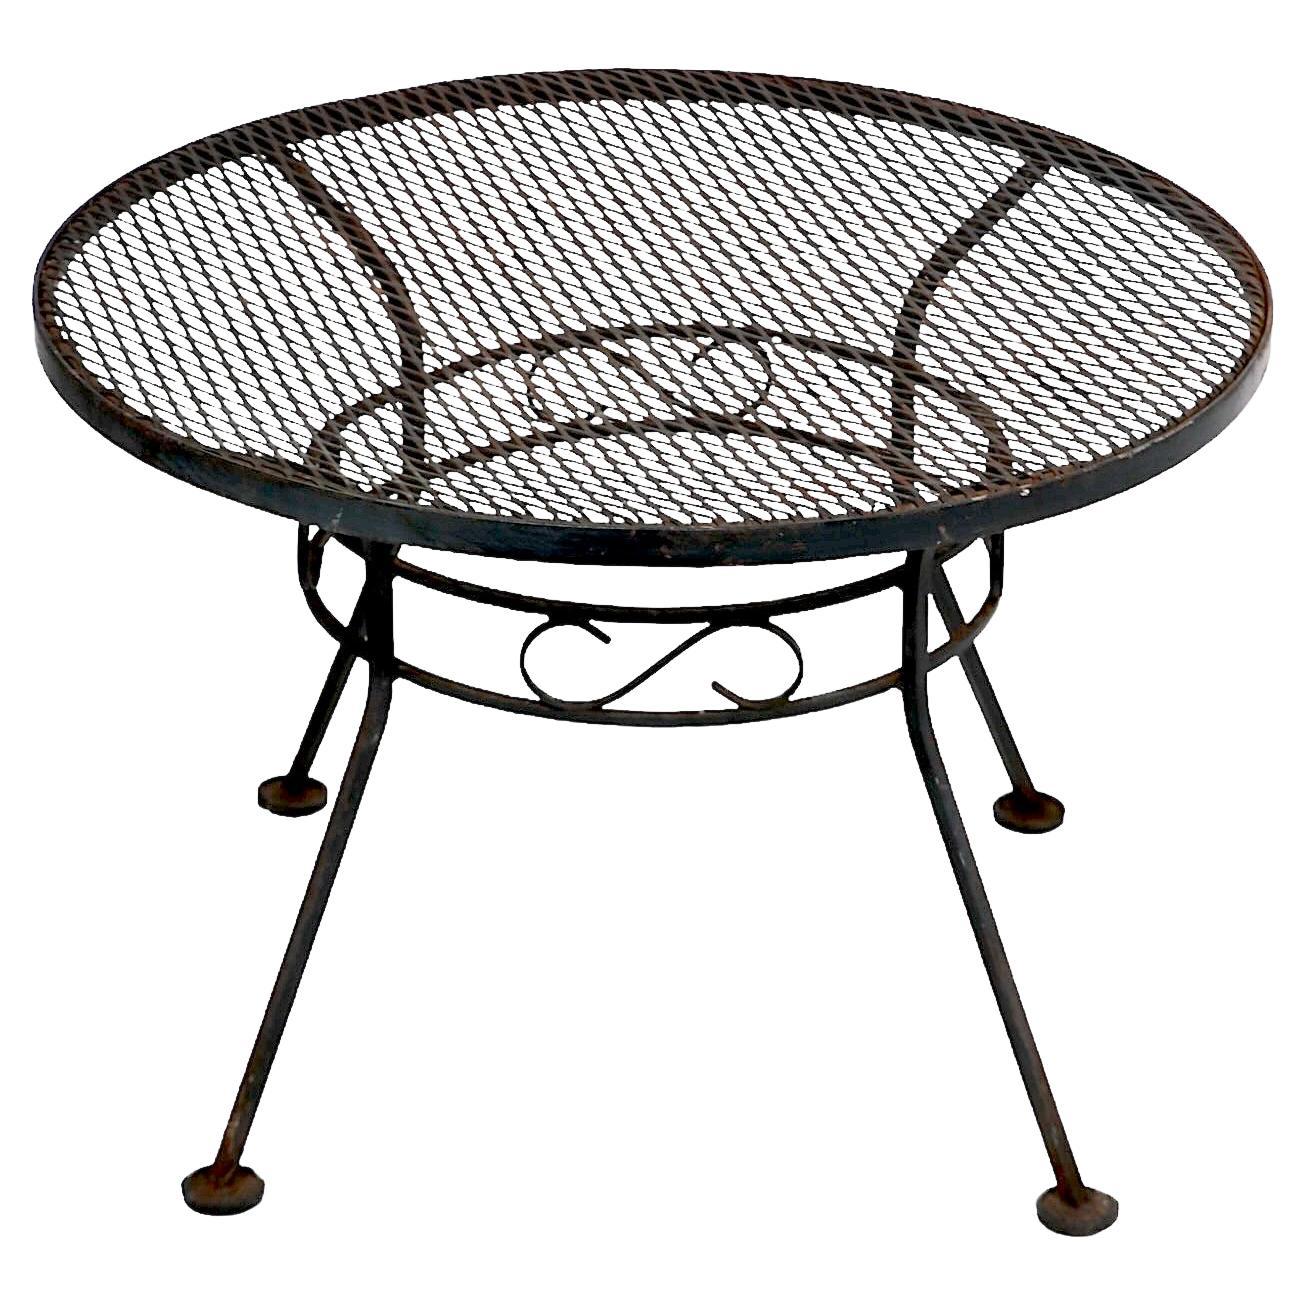  Small Wrought Iron  Garden Patio Poolside Table by Woodard c. 1940/60's For Sale